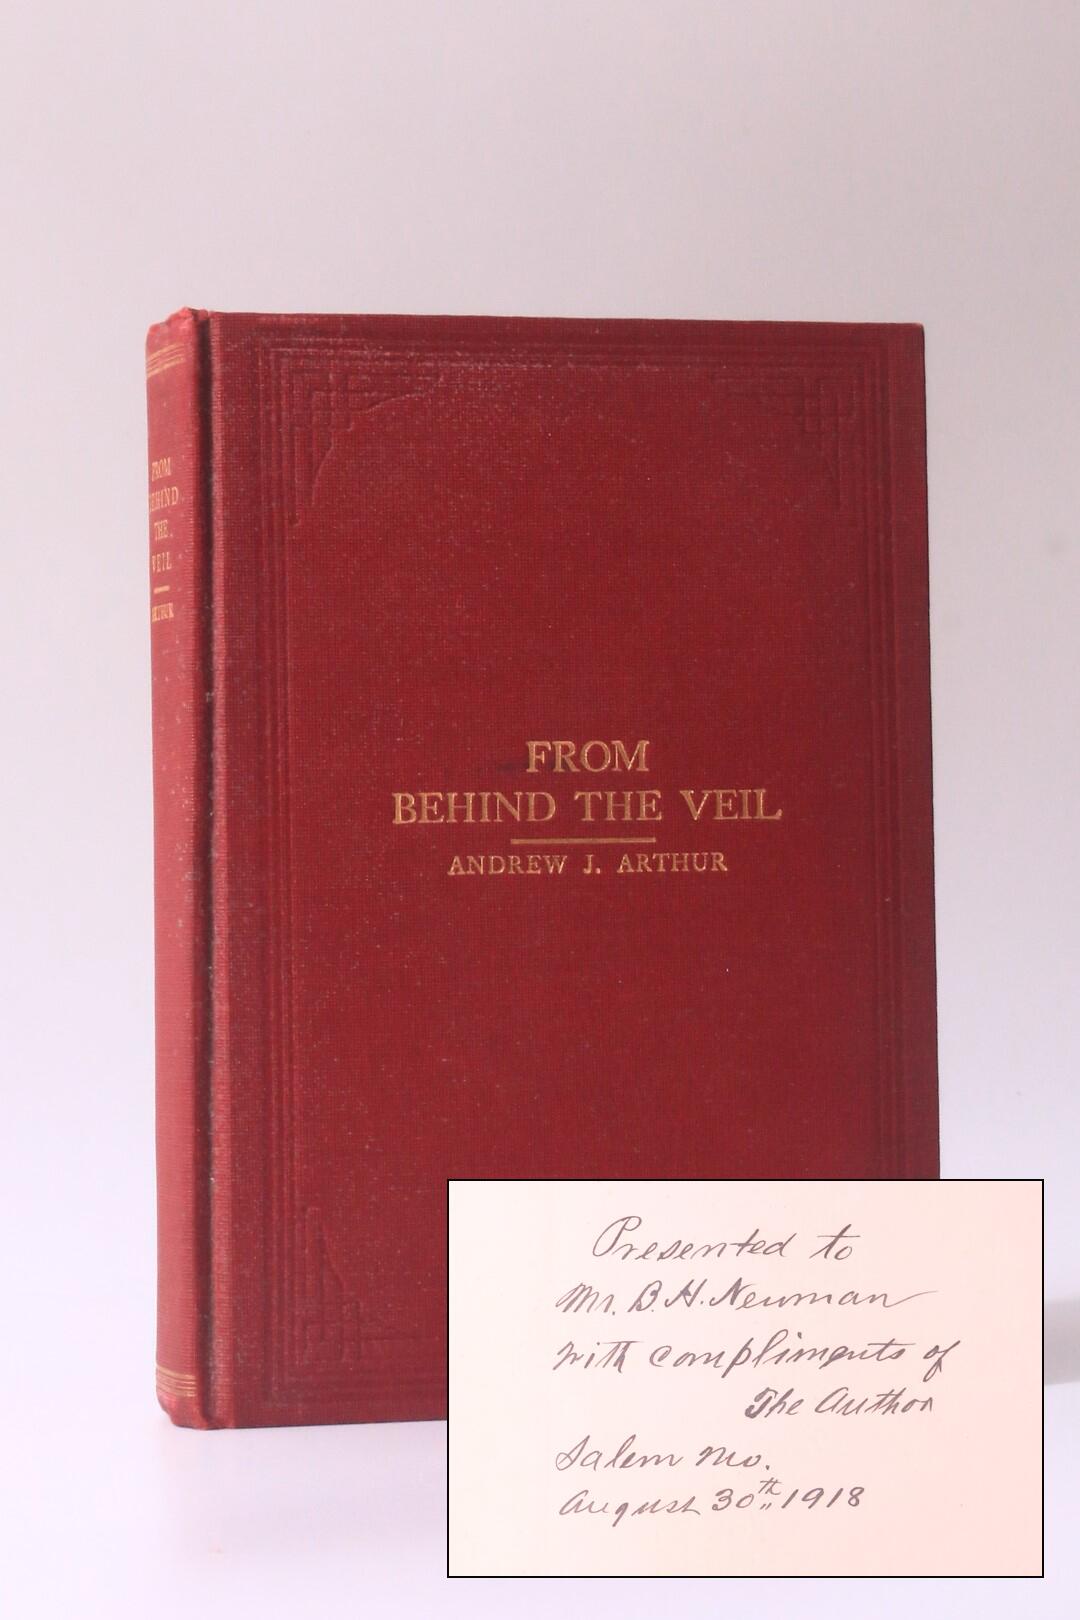 Andrew J. Arthur - From Behind the Veil - Christian Publishing Company, 1901, Signed First Edition.